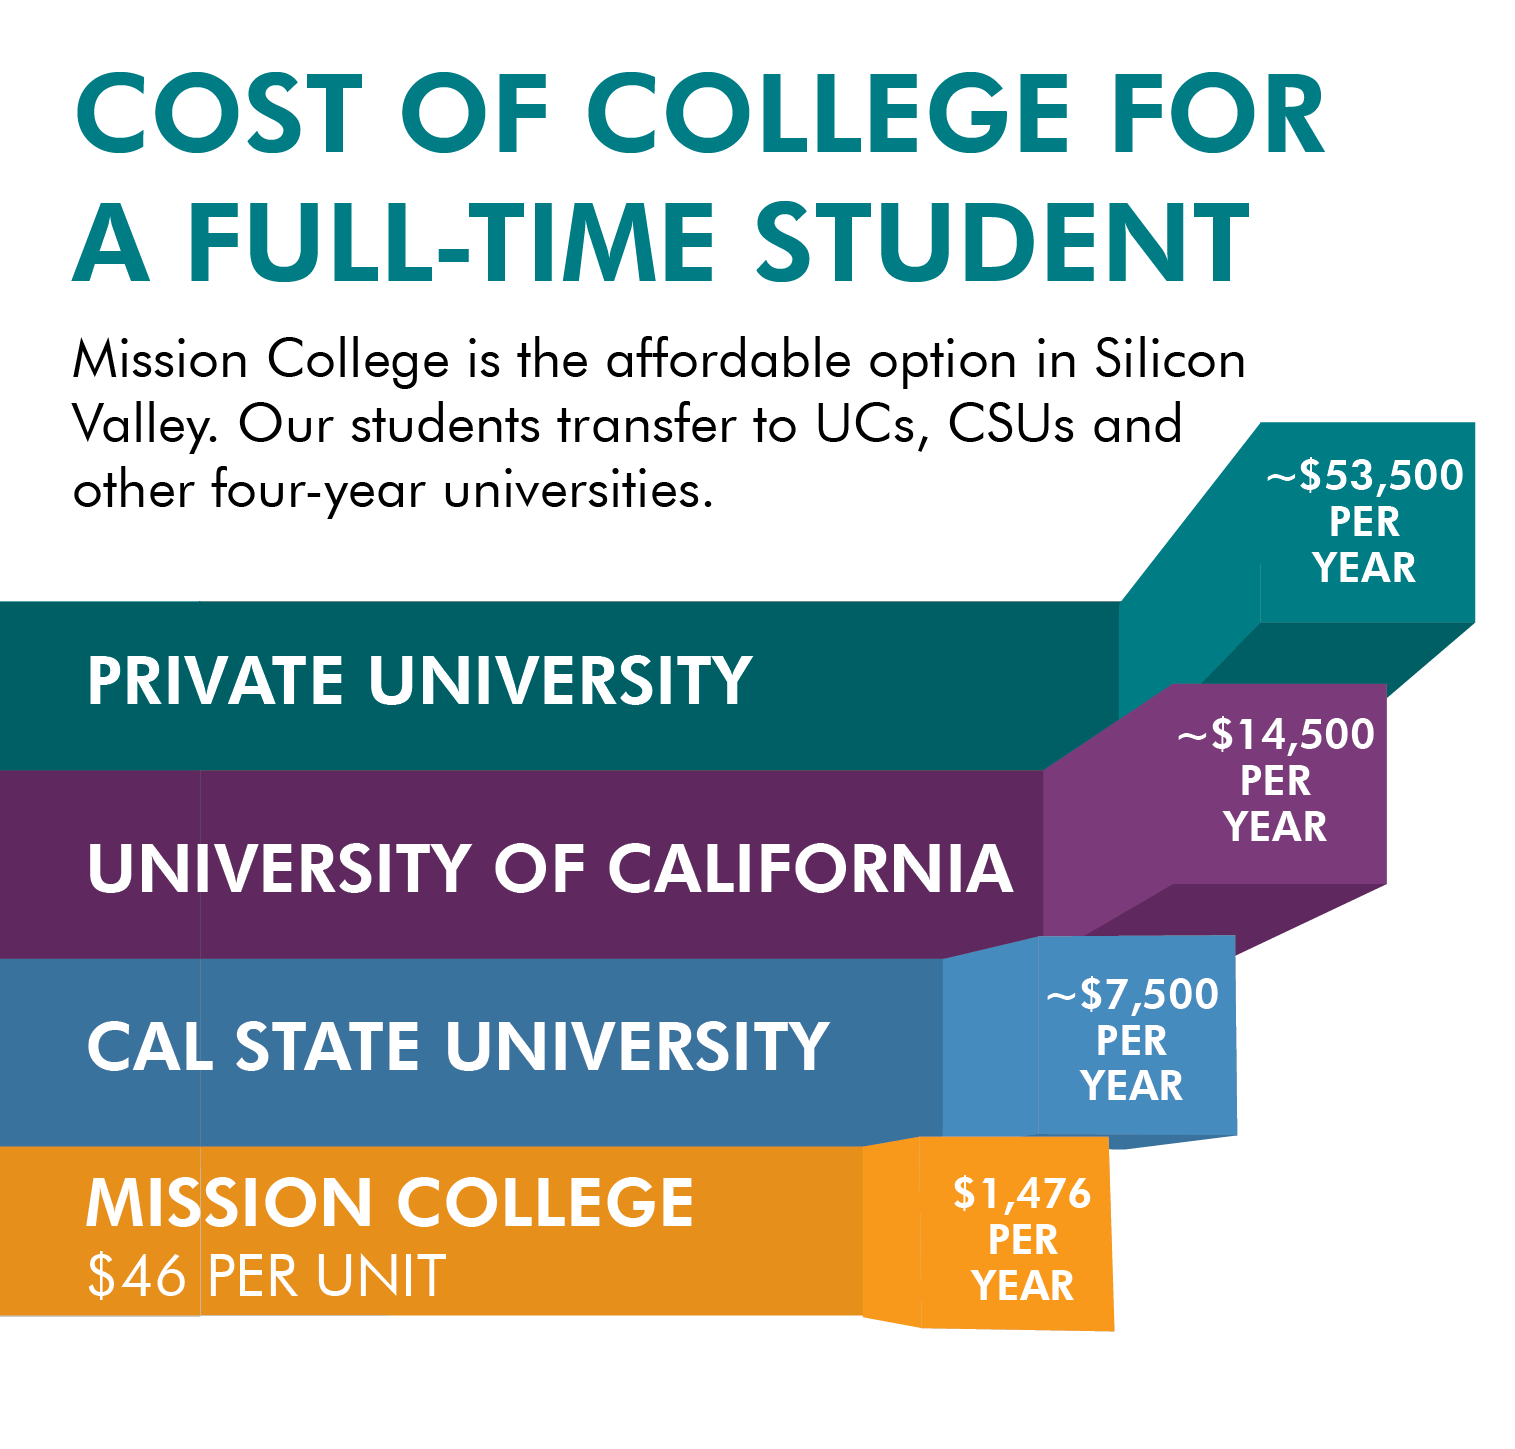 Mission College is the affordable option in Silicon Valley. Our students transfer to CUs, CSUs and other four-year universities. 